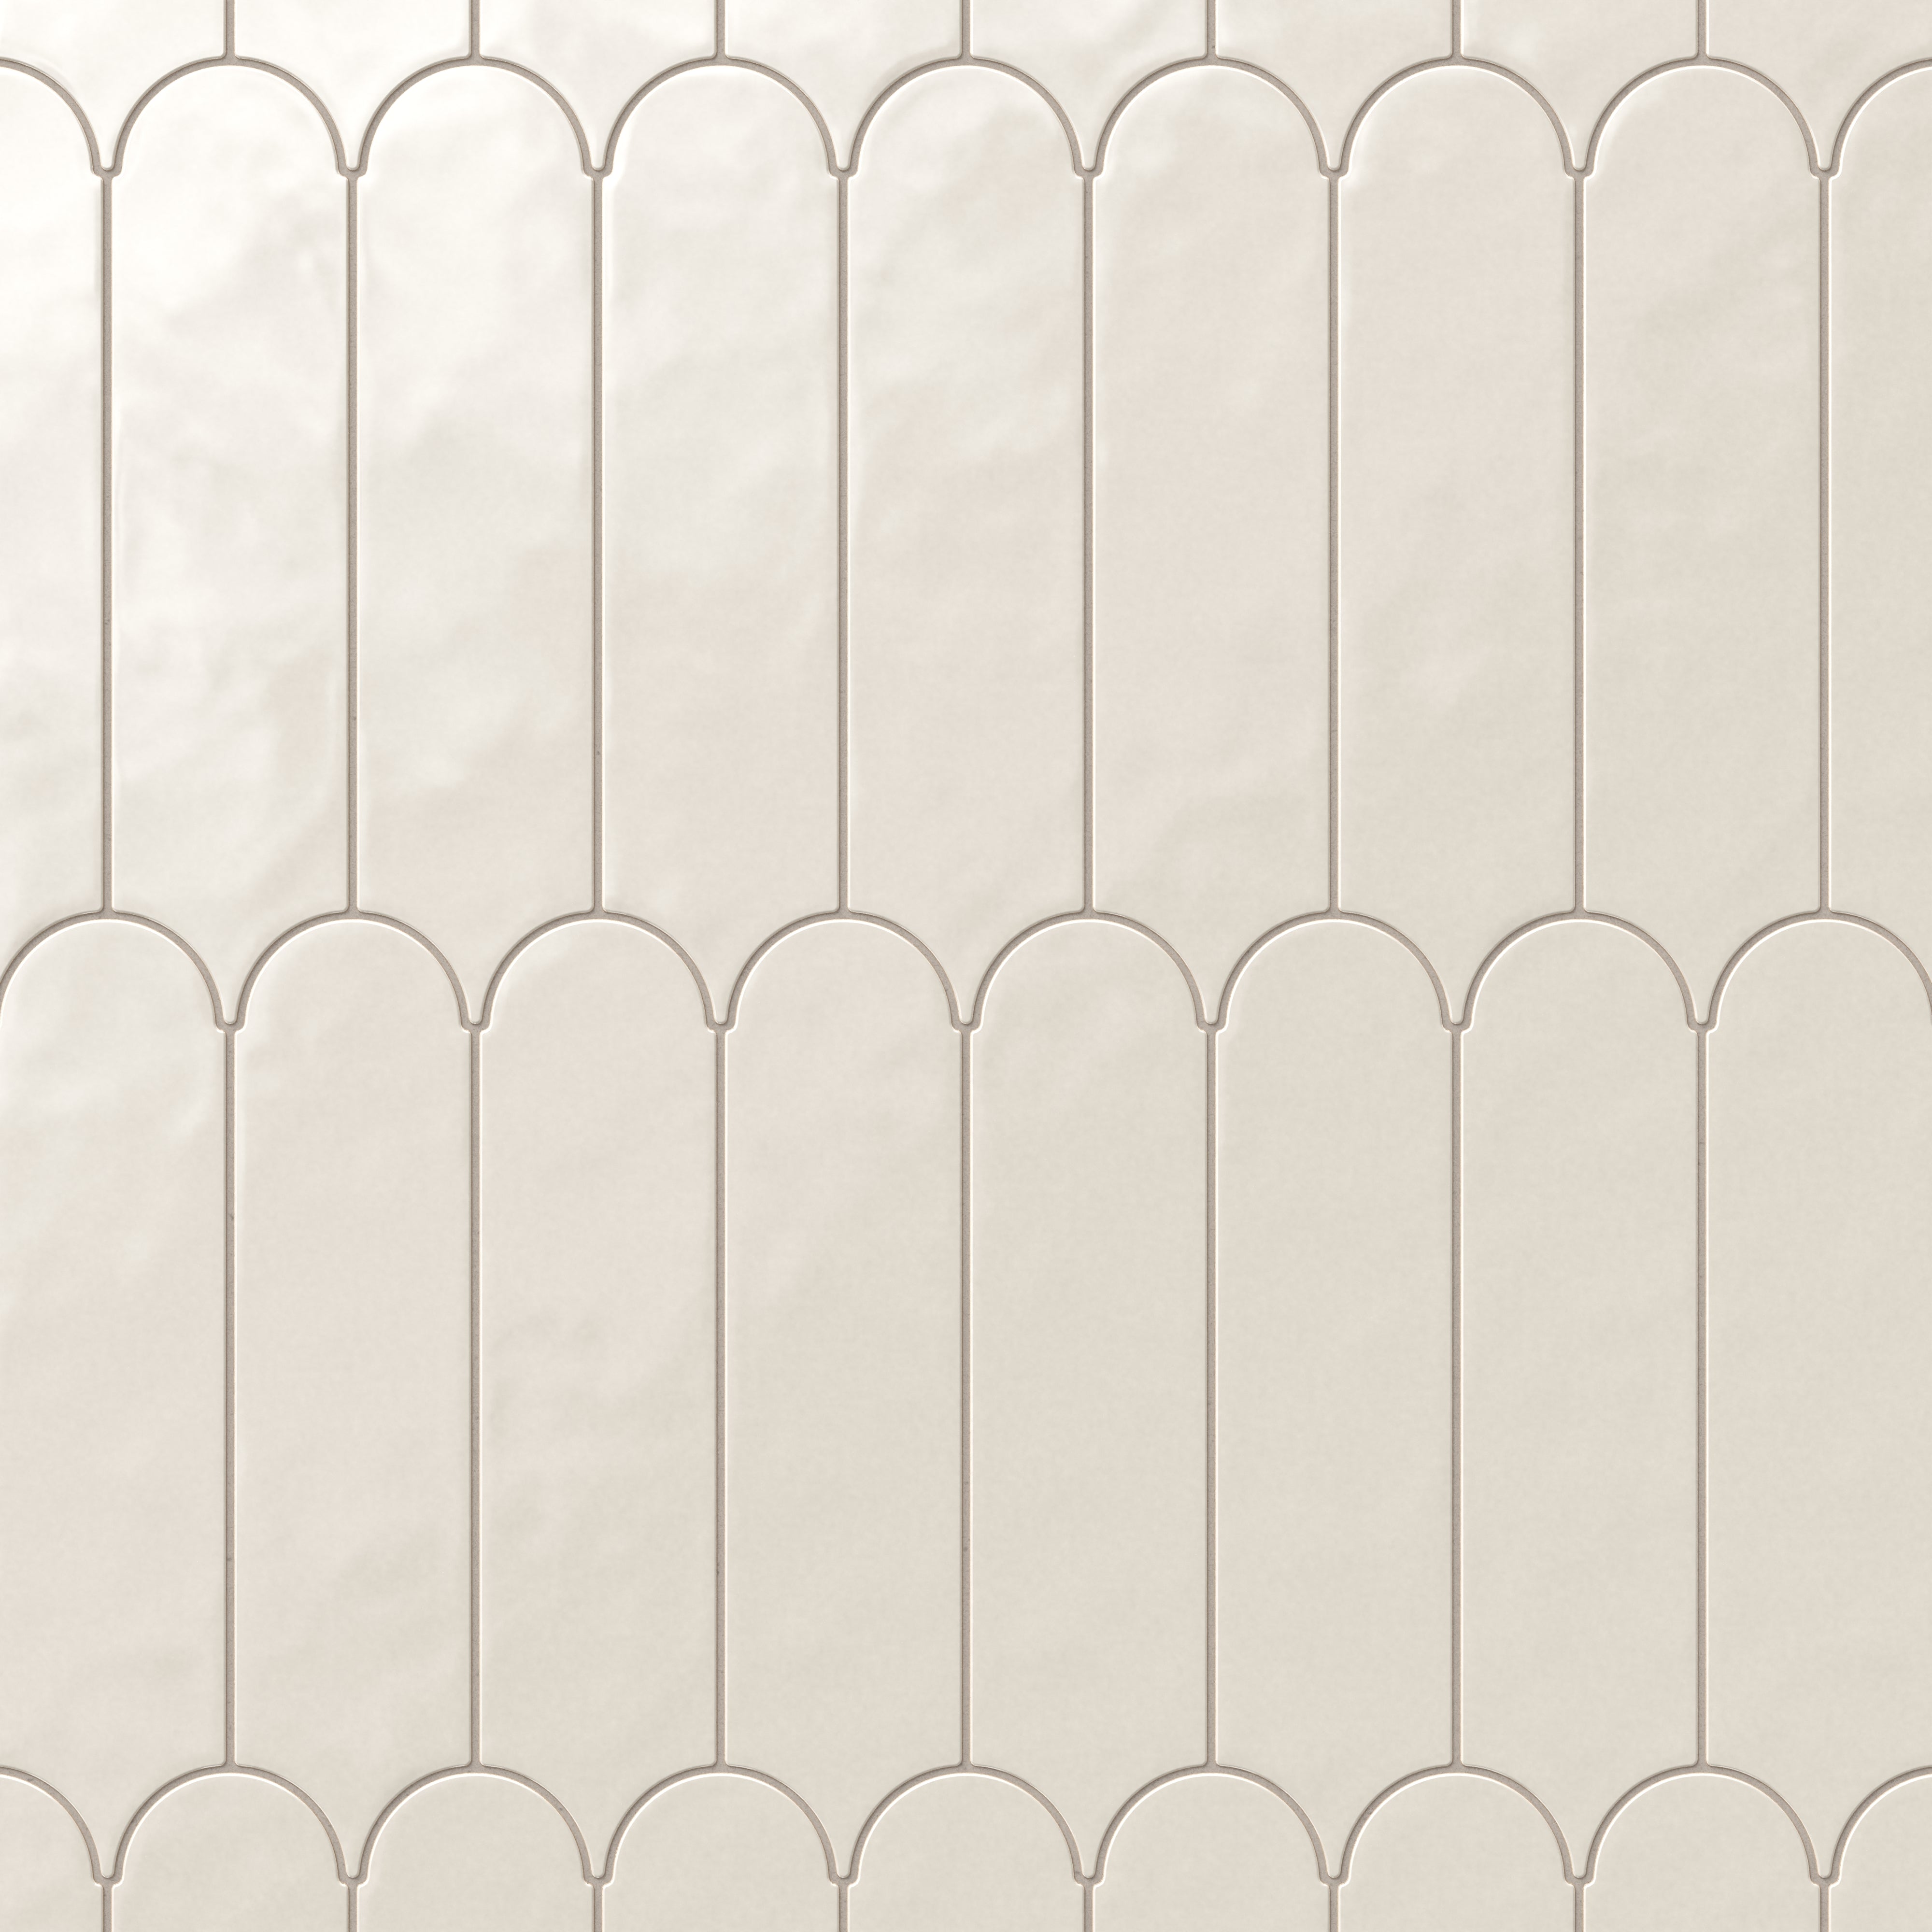 Sarina 3x12 Glossy Porcelain Fishscale Tile in Shell